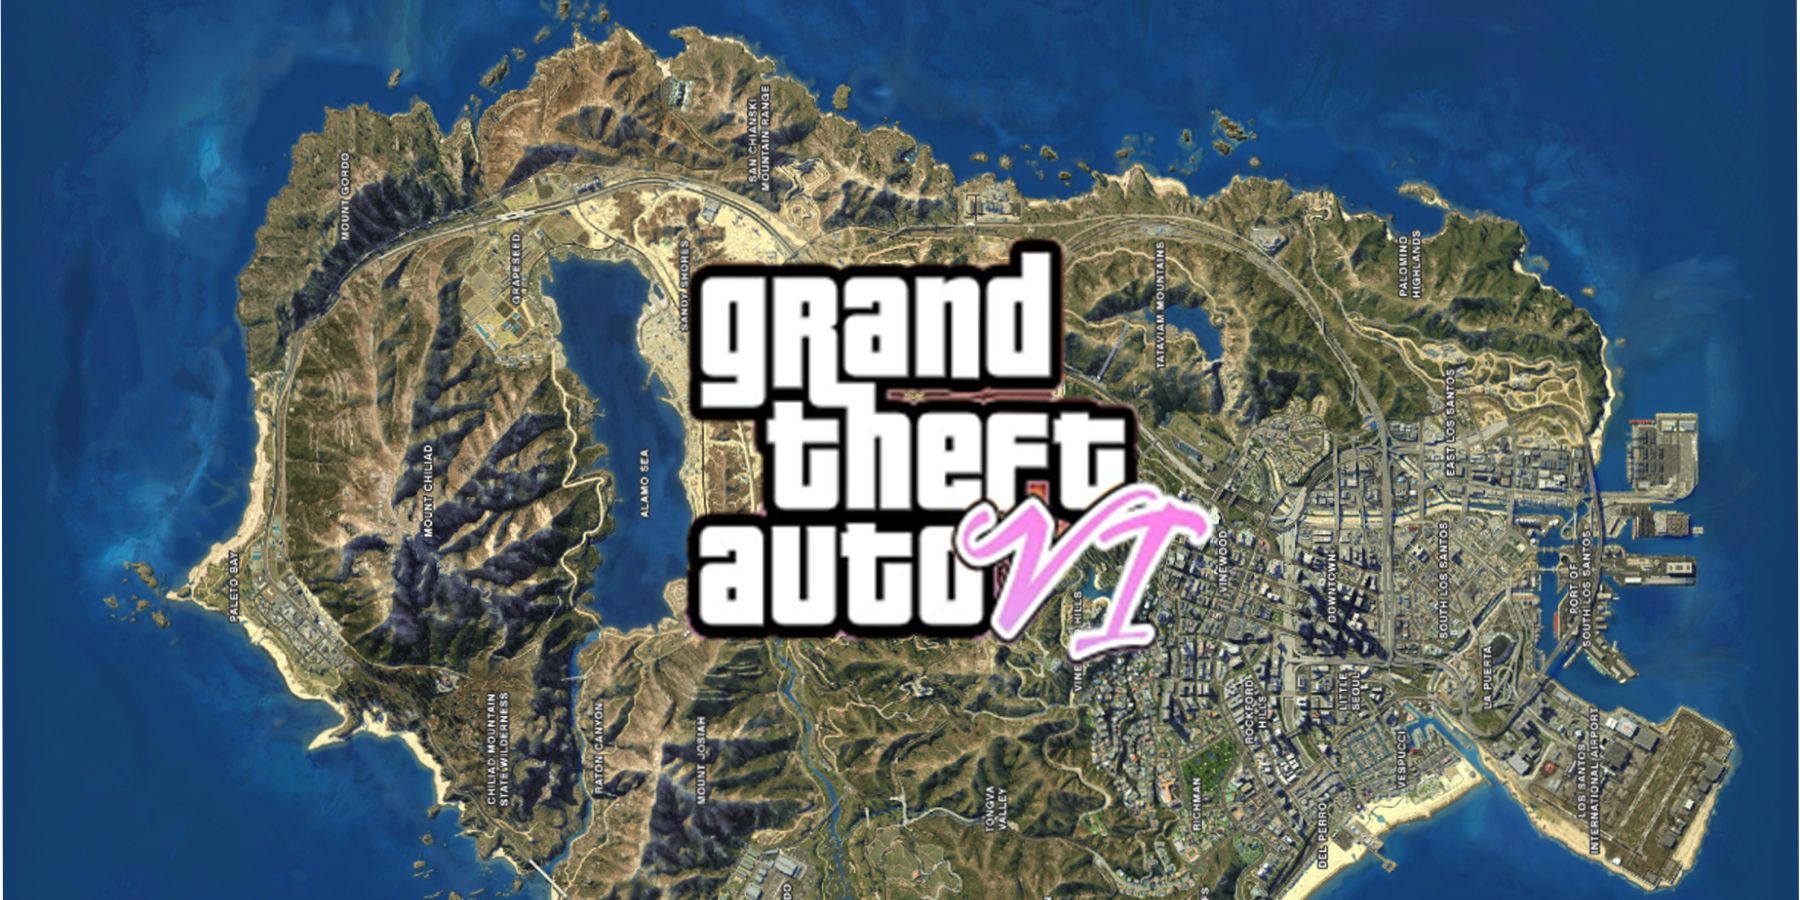 GTA 6 Roundup: Expected Release Date, Storyline, Maps, GTA 6